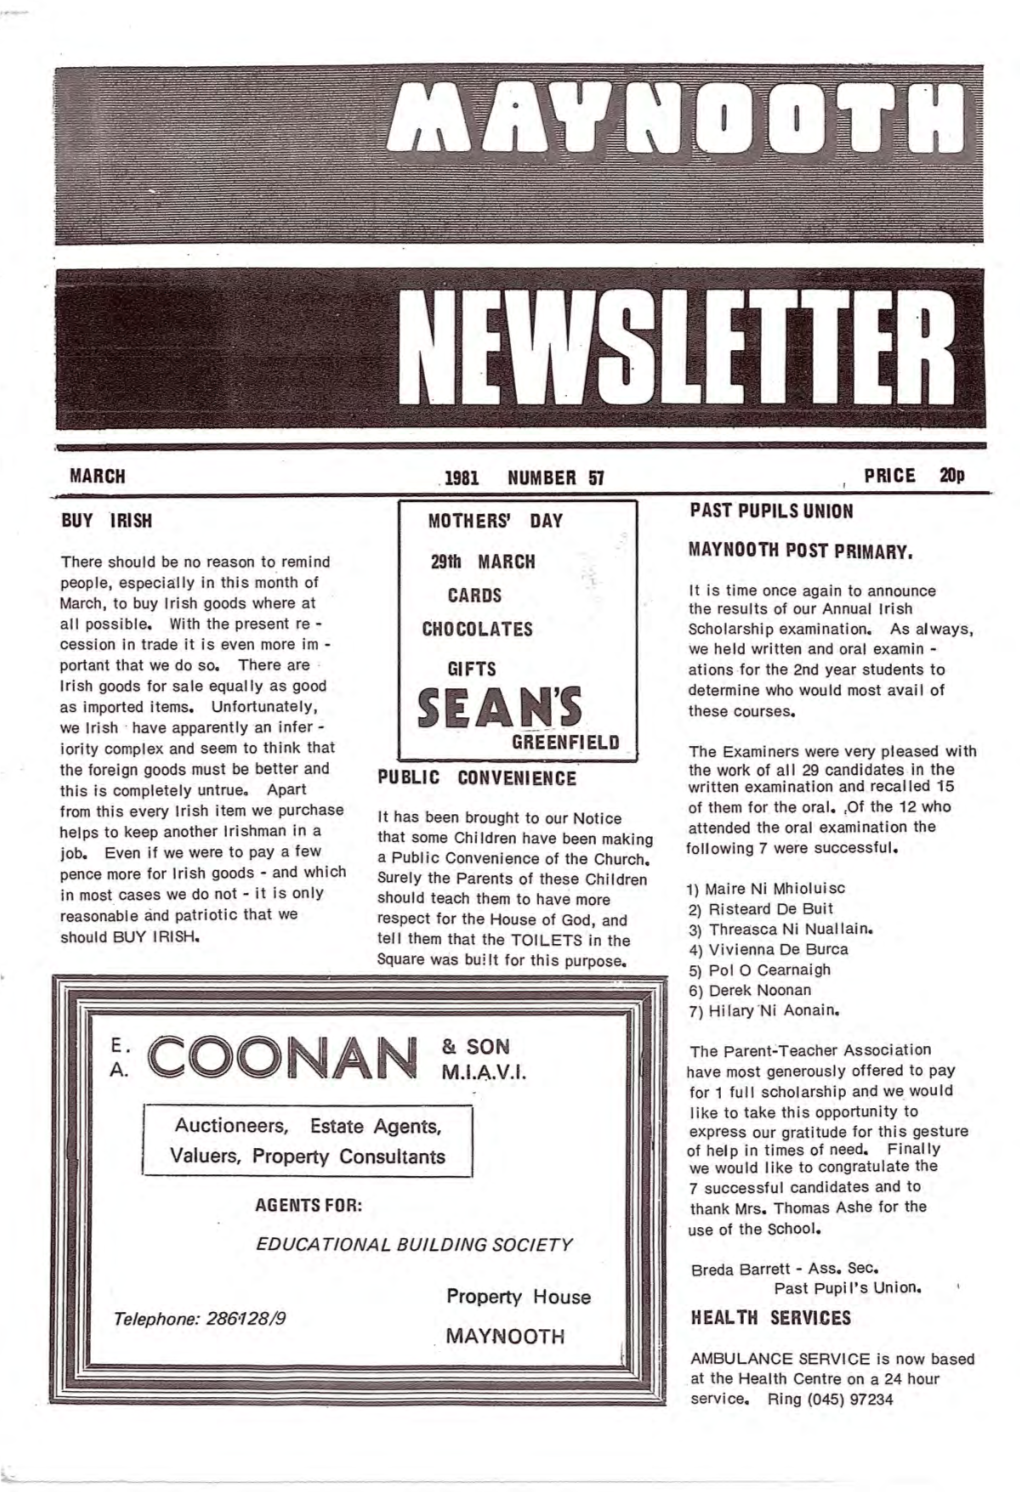 MARCH 1981 NUMBER 51 PRICE 20P PAST PUPILS UNION BUY IRISH MOTHERS' DAY MAYNOOTH POST PRIMARY